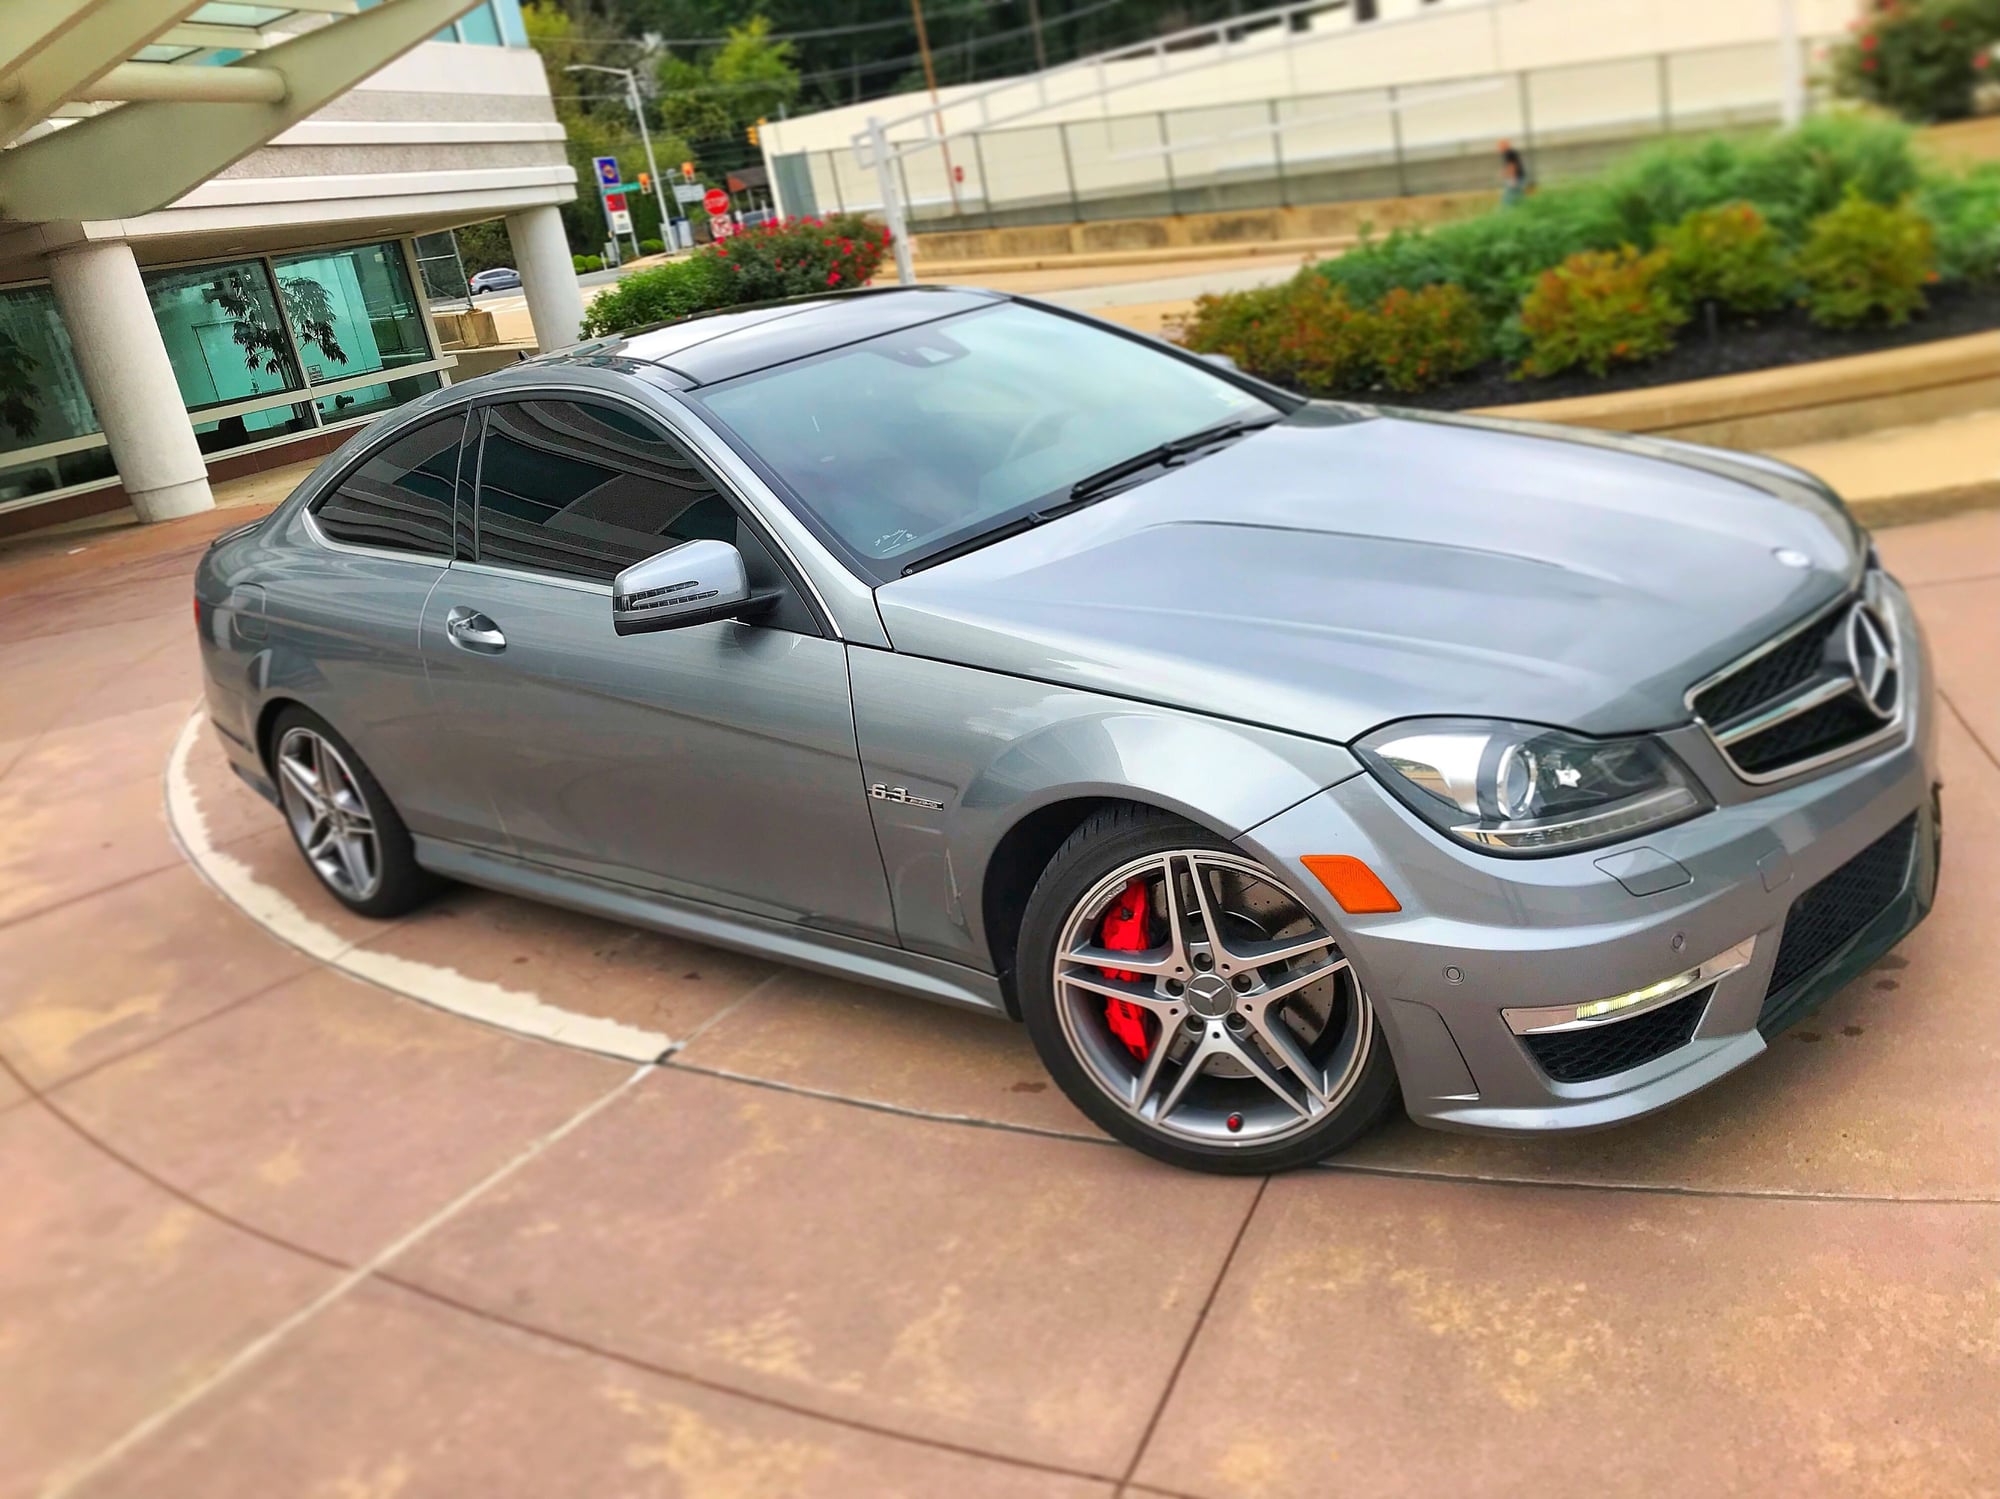 2012 Mercedes-Benz C63 AMG - Mercedes-Benz C63 AMG Coupe P31 Development Package & Designo Leather Upgrade - Used - VIN WDDGJ7HB8CF846541 - 47,700 Miles - 8 cyl - 2WD - Automatic - Coupe - Philadelphia, PA 19019, United States